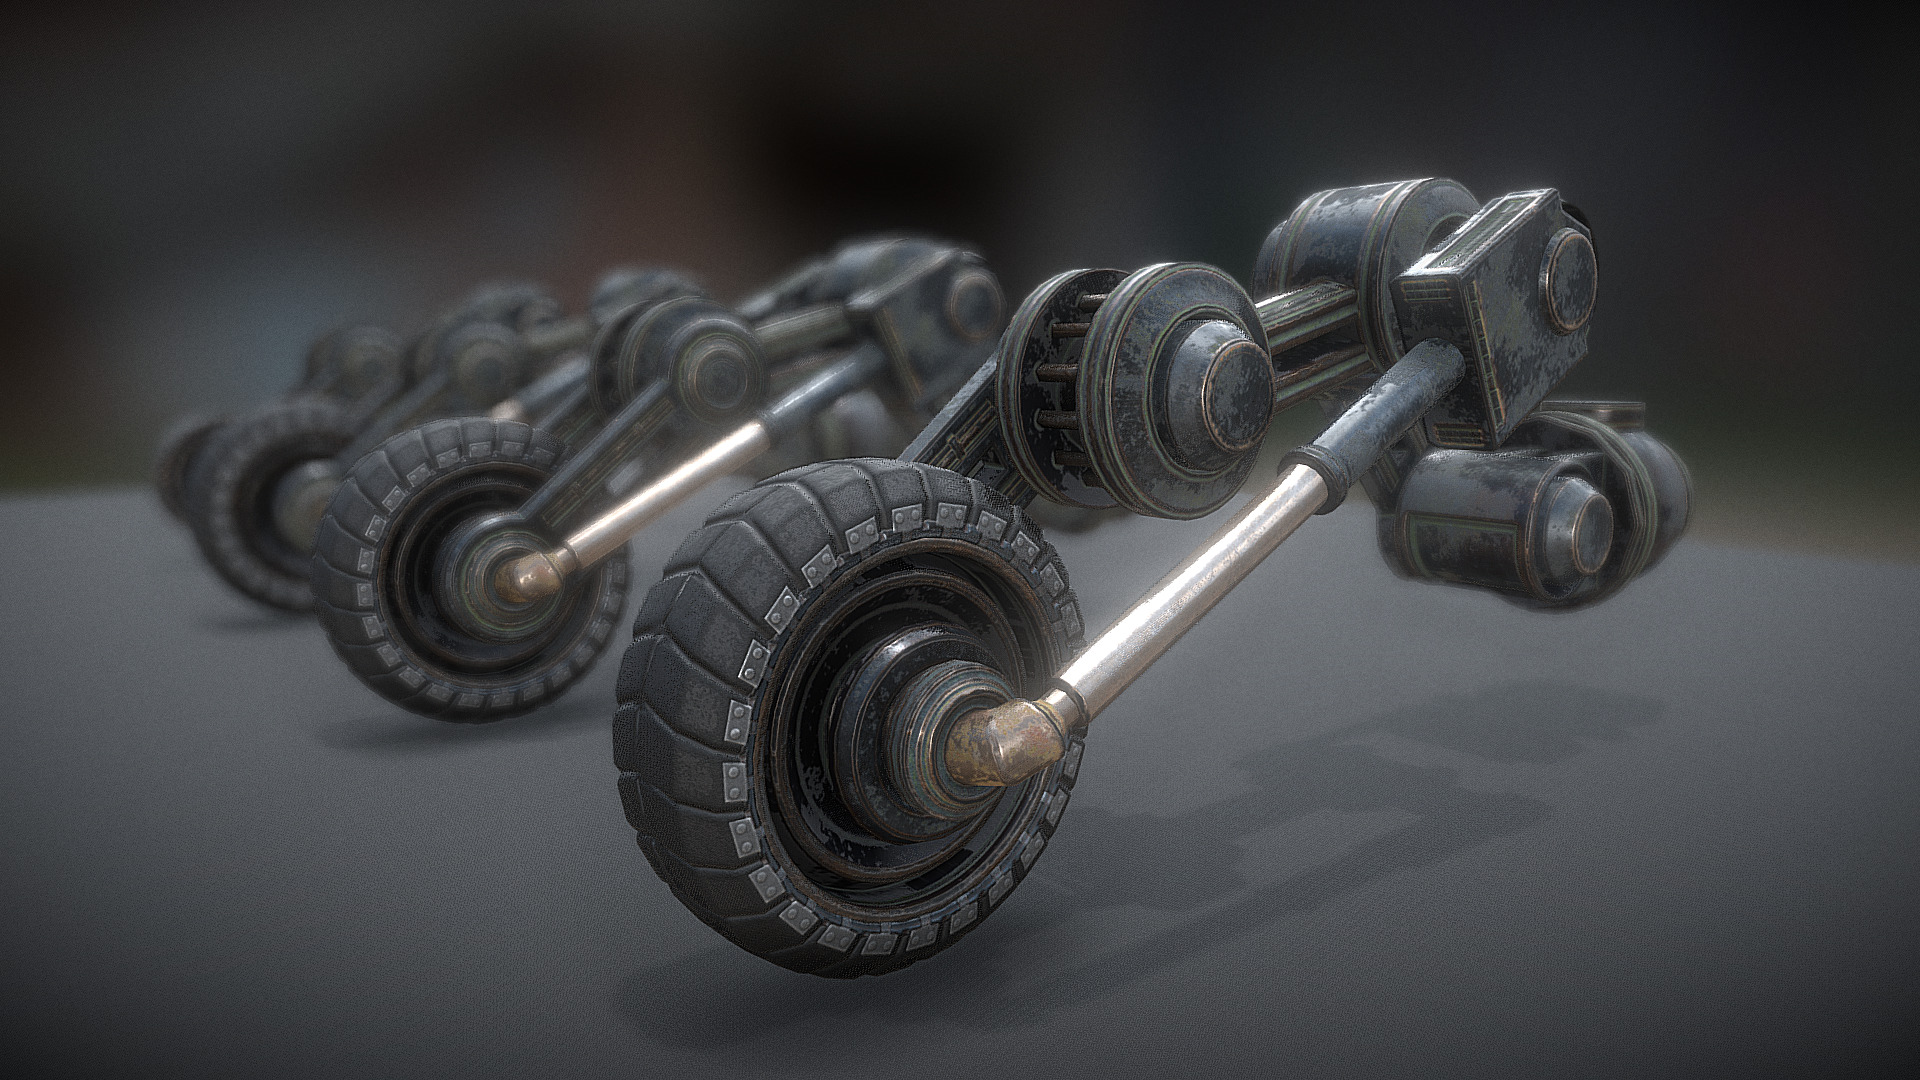 3D model Hydraulic Suspension old Version 1 - This is a 3D model of the Hydraulic Suspension old Version 1. The 3D model is about a close-up of some gears.